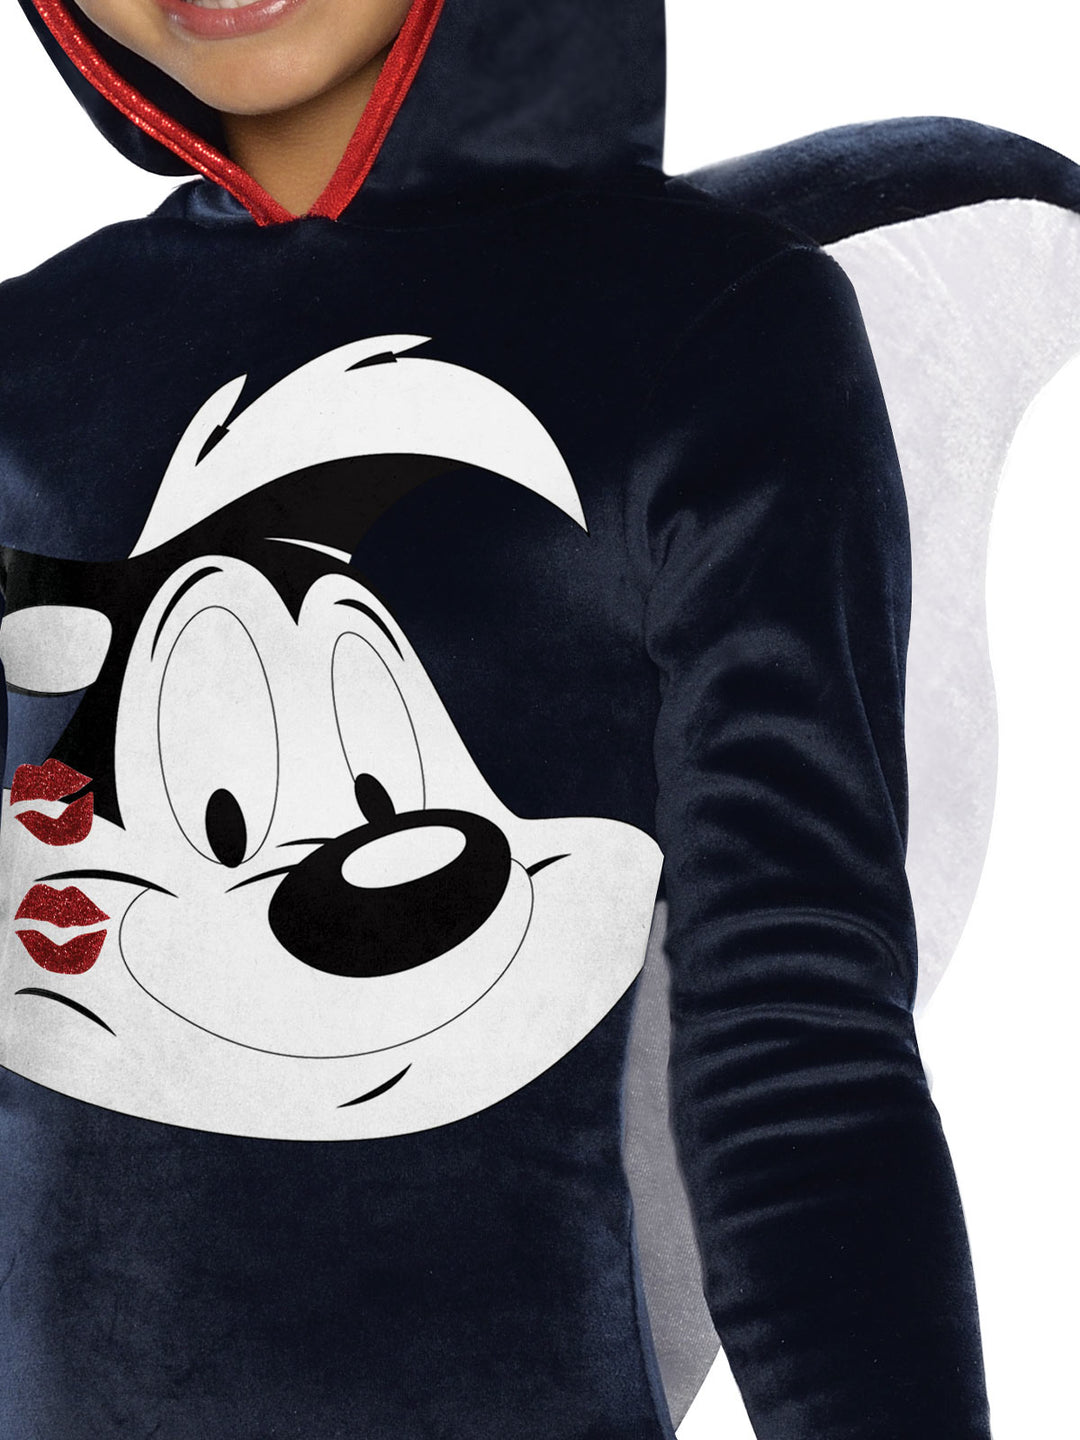 PEPE LE PEW HOODED COSTUME, CHILD - Little Shop of Horrors